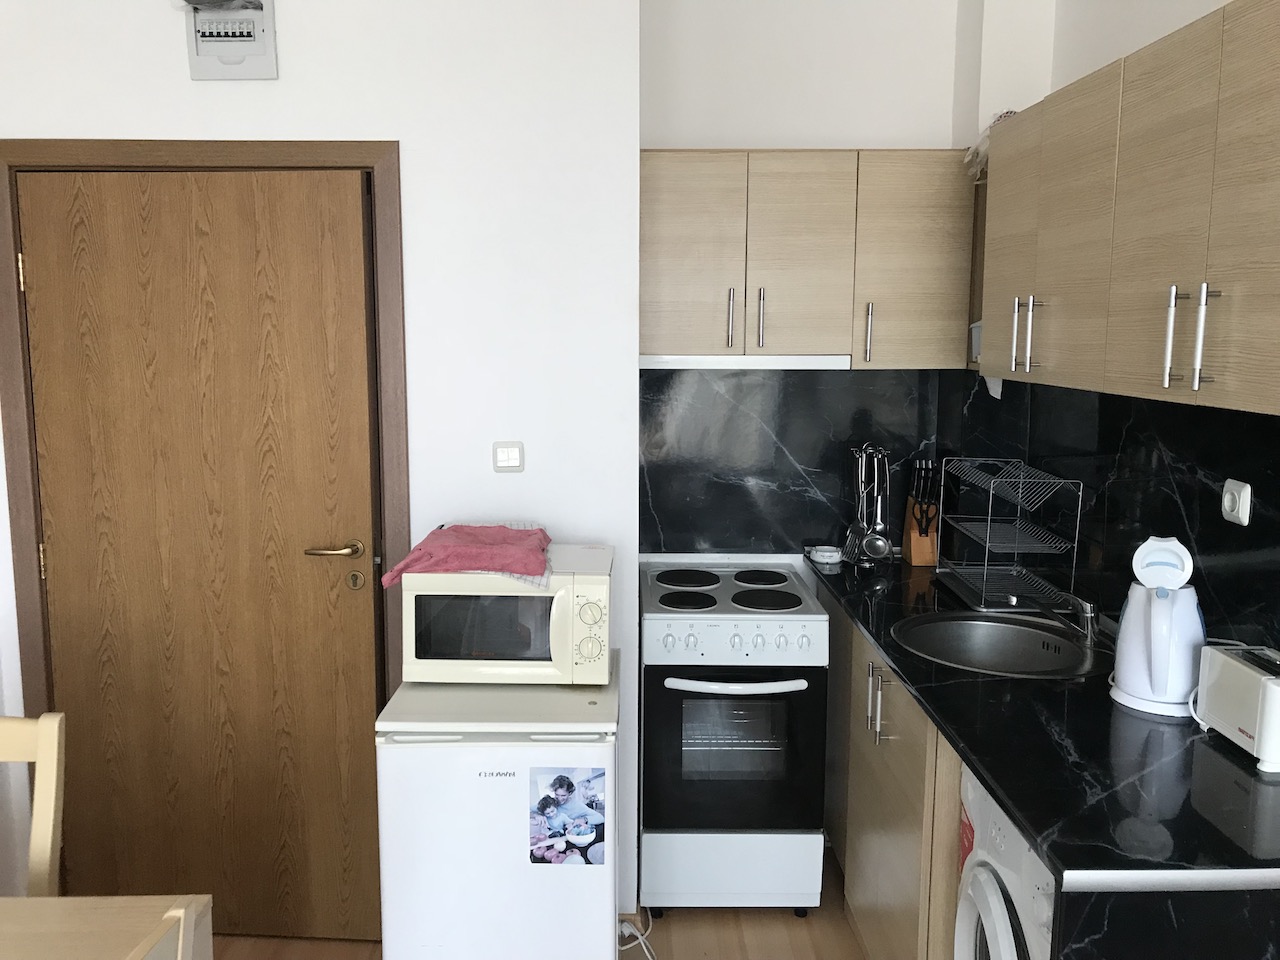 RL-2437 Apartment for Sale in Burgas, Sunny Beach Resort - € 31,000